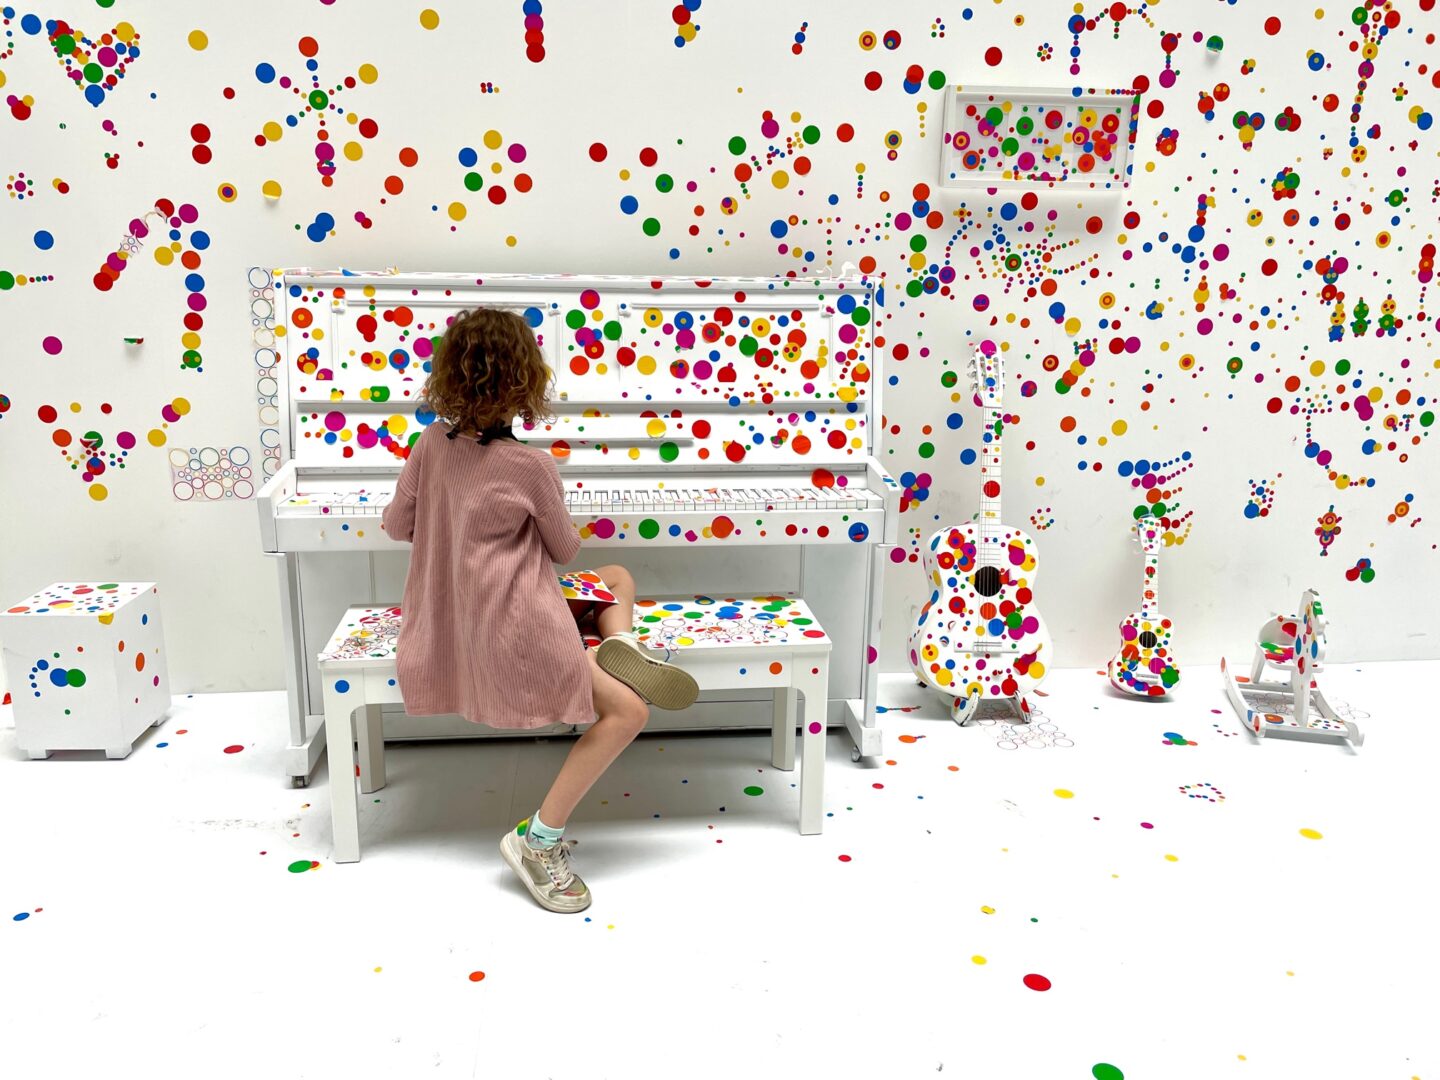 The Obliteration Room at Tate Modern London